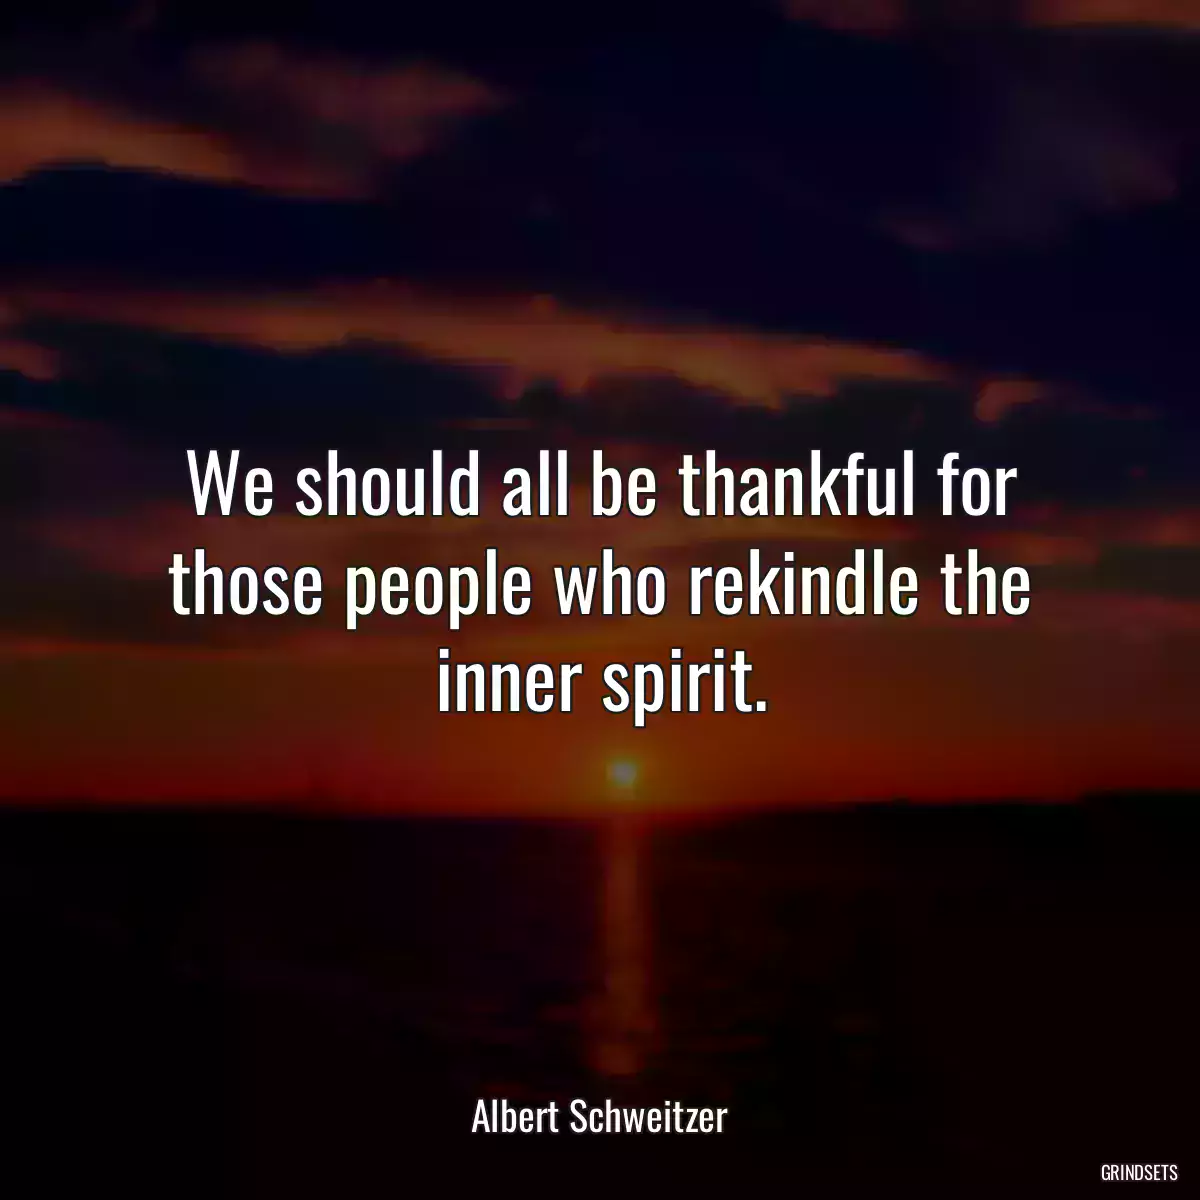 We should all be thankful for those people who rekindle the inner spirit.